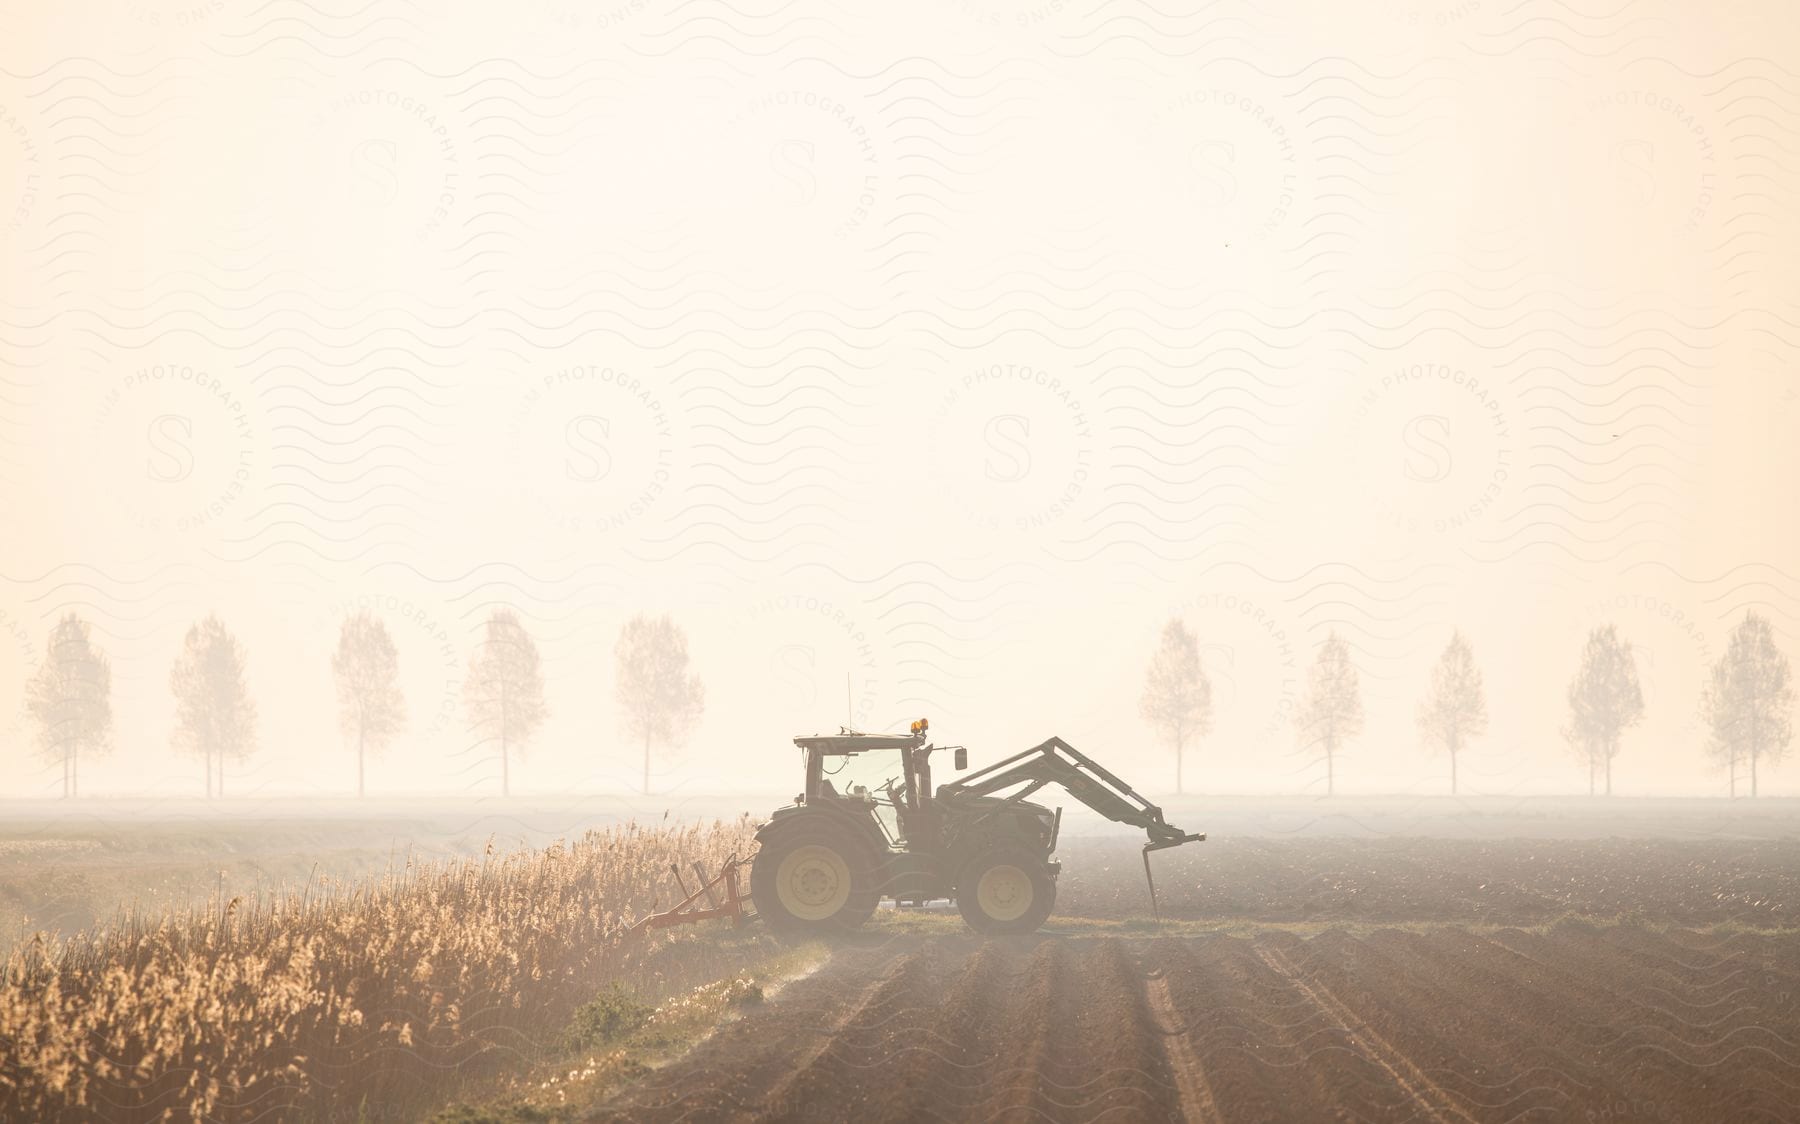 A parked tractor next to rows of crops in an agricultural setting at dawn or dusk